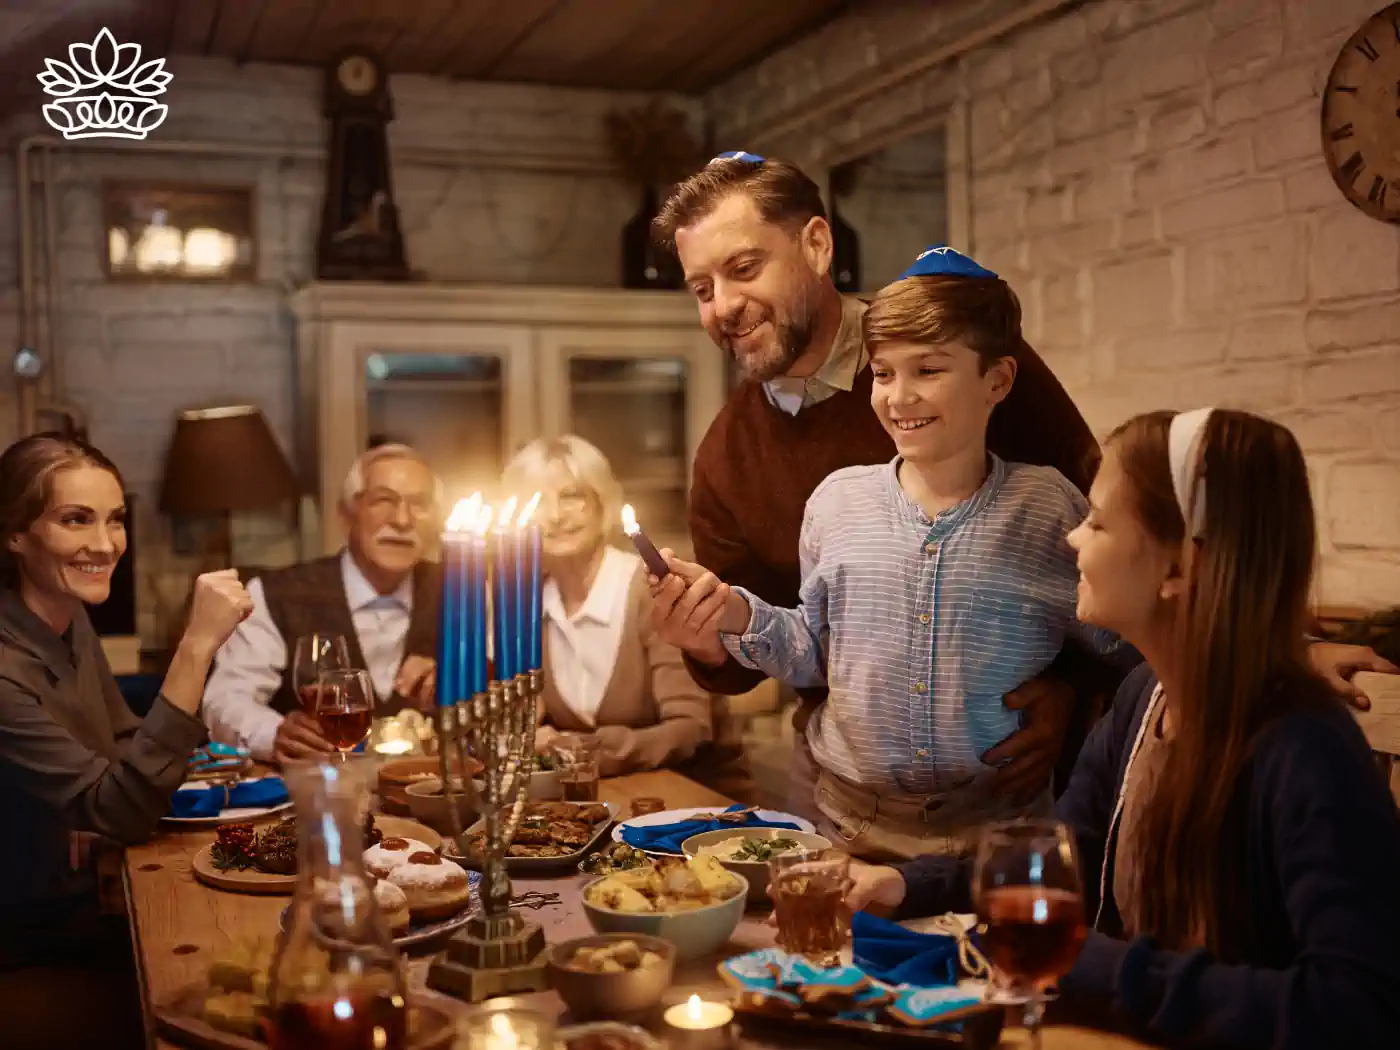 A family gathered around a table, lighting the Hanukkah menorah together in a warm, festive setting. Fabulous Flowers and Gifts - Hanukkah Collection.